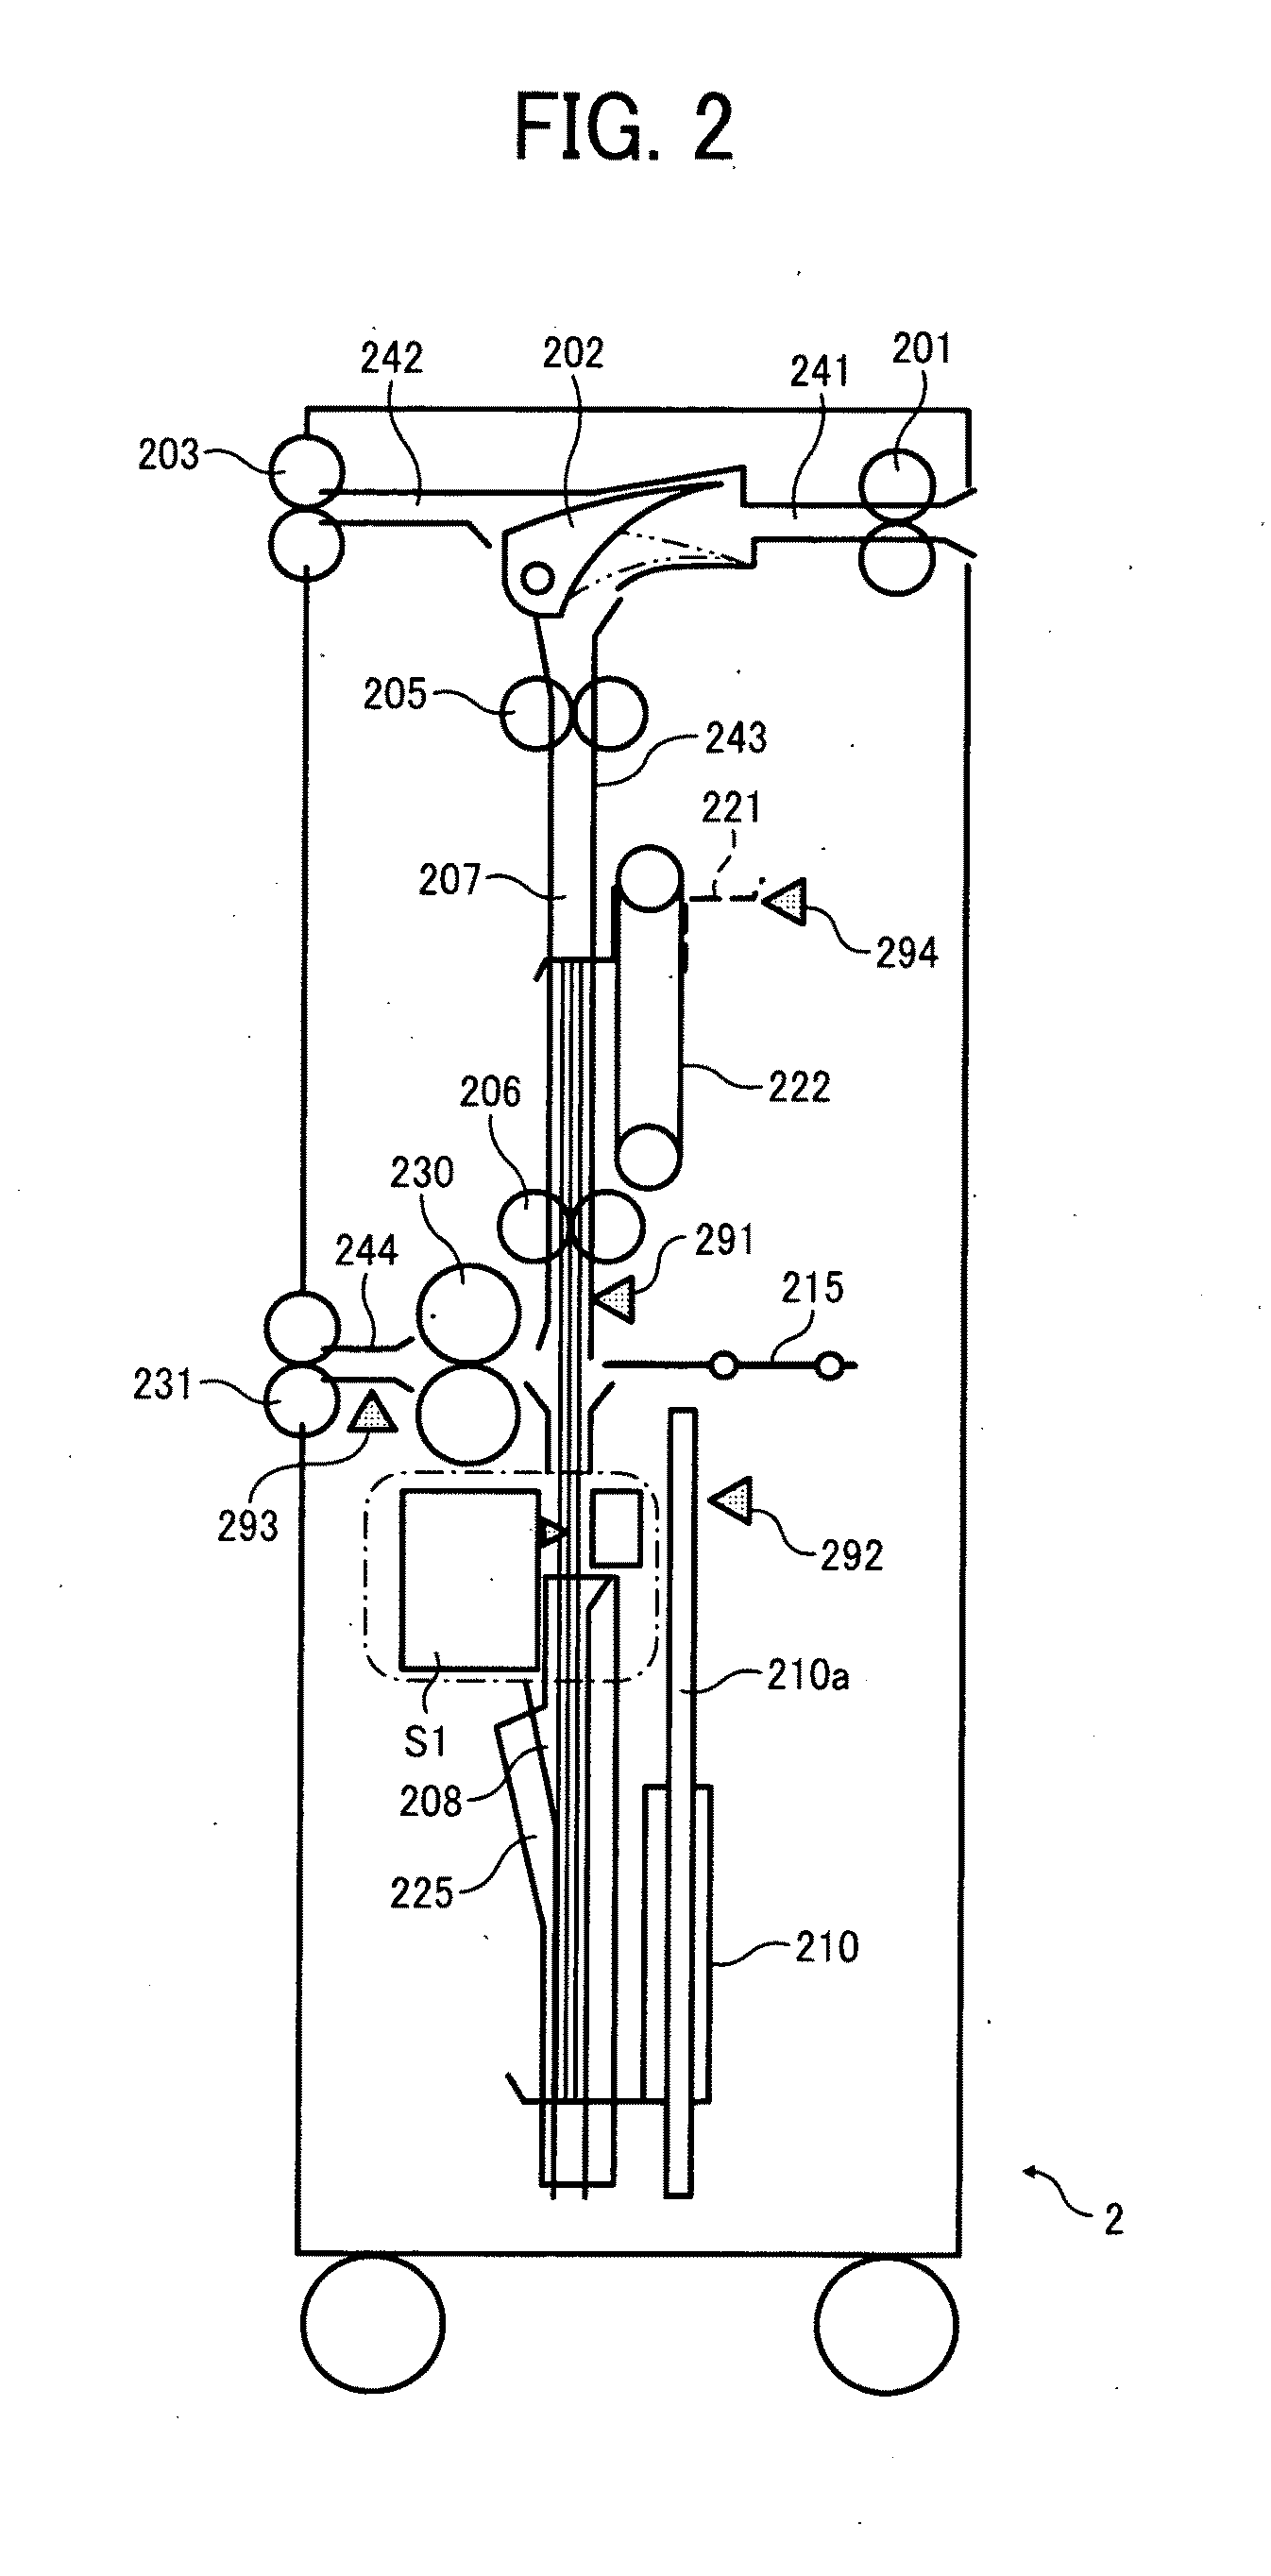 Spine formation device, post-processing apparatus, spine formation system, and spine formation method